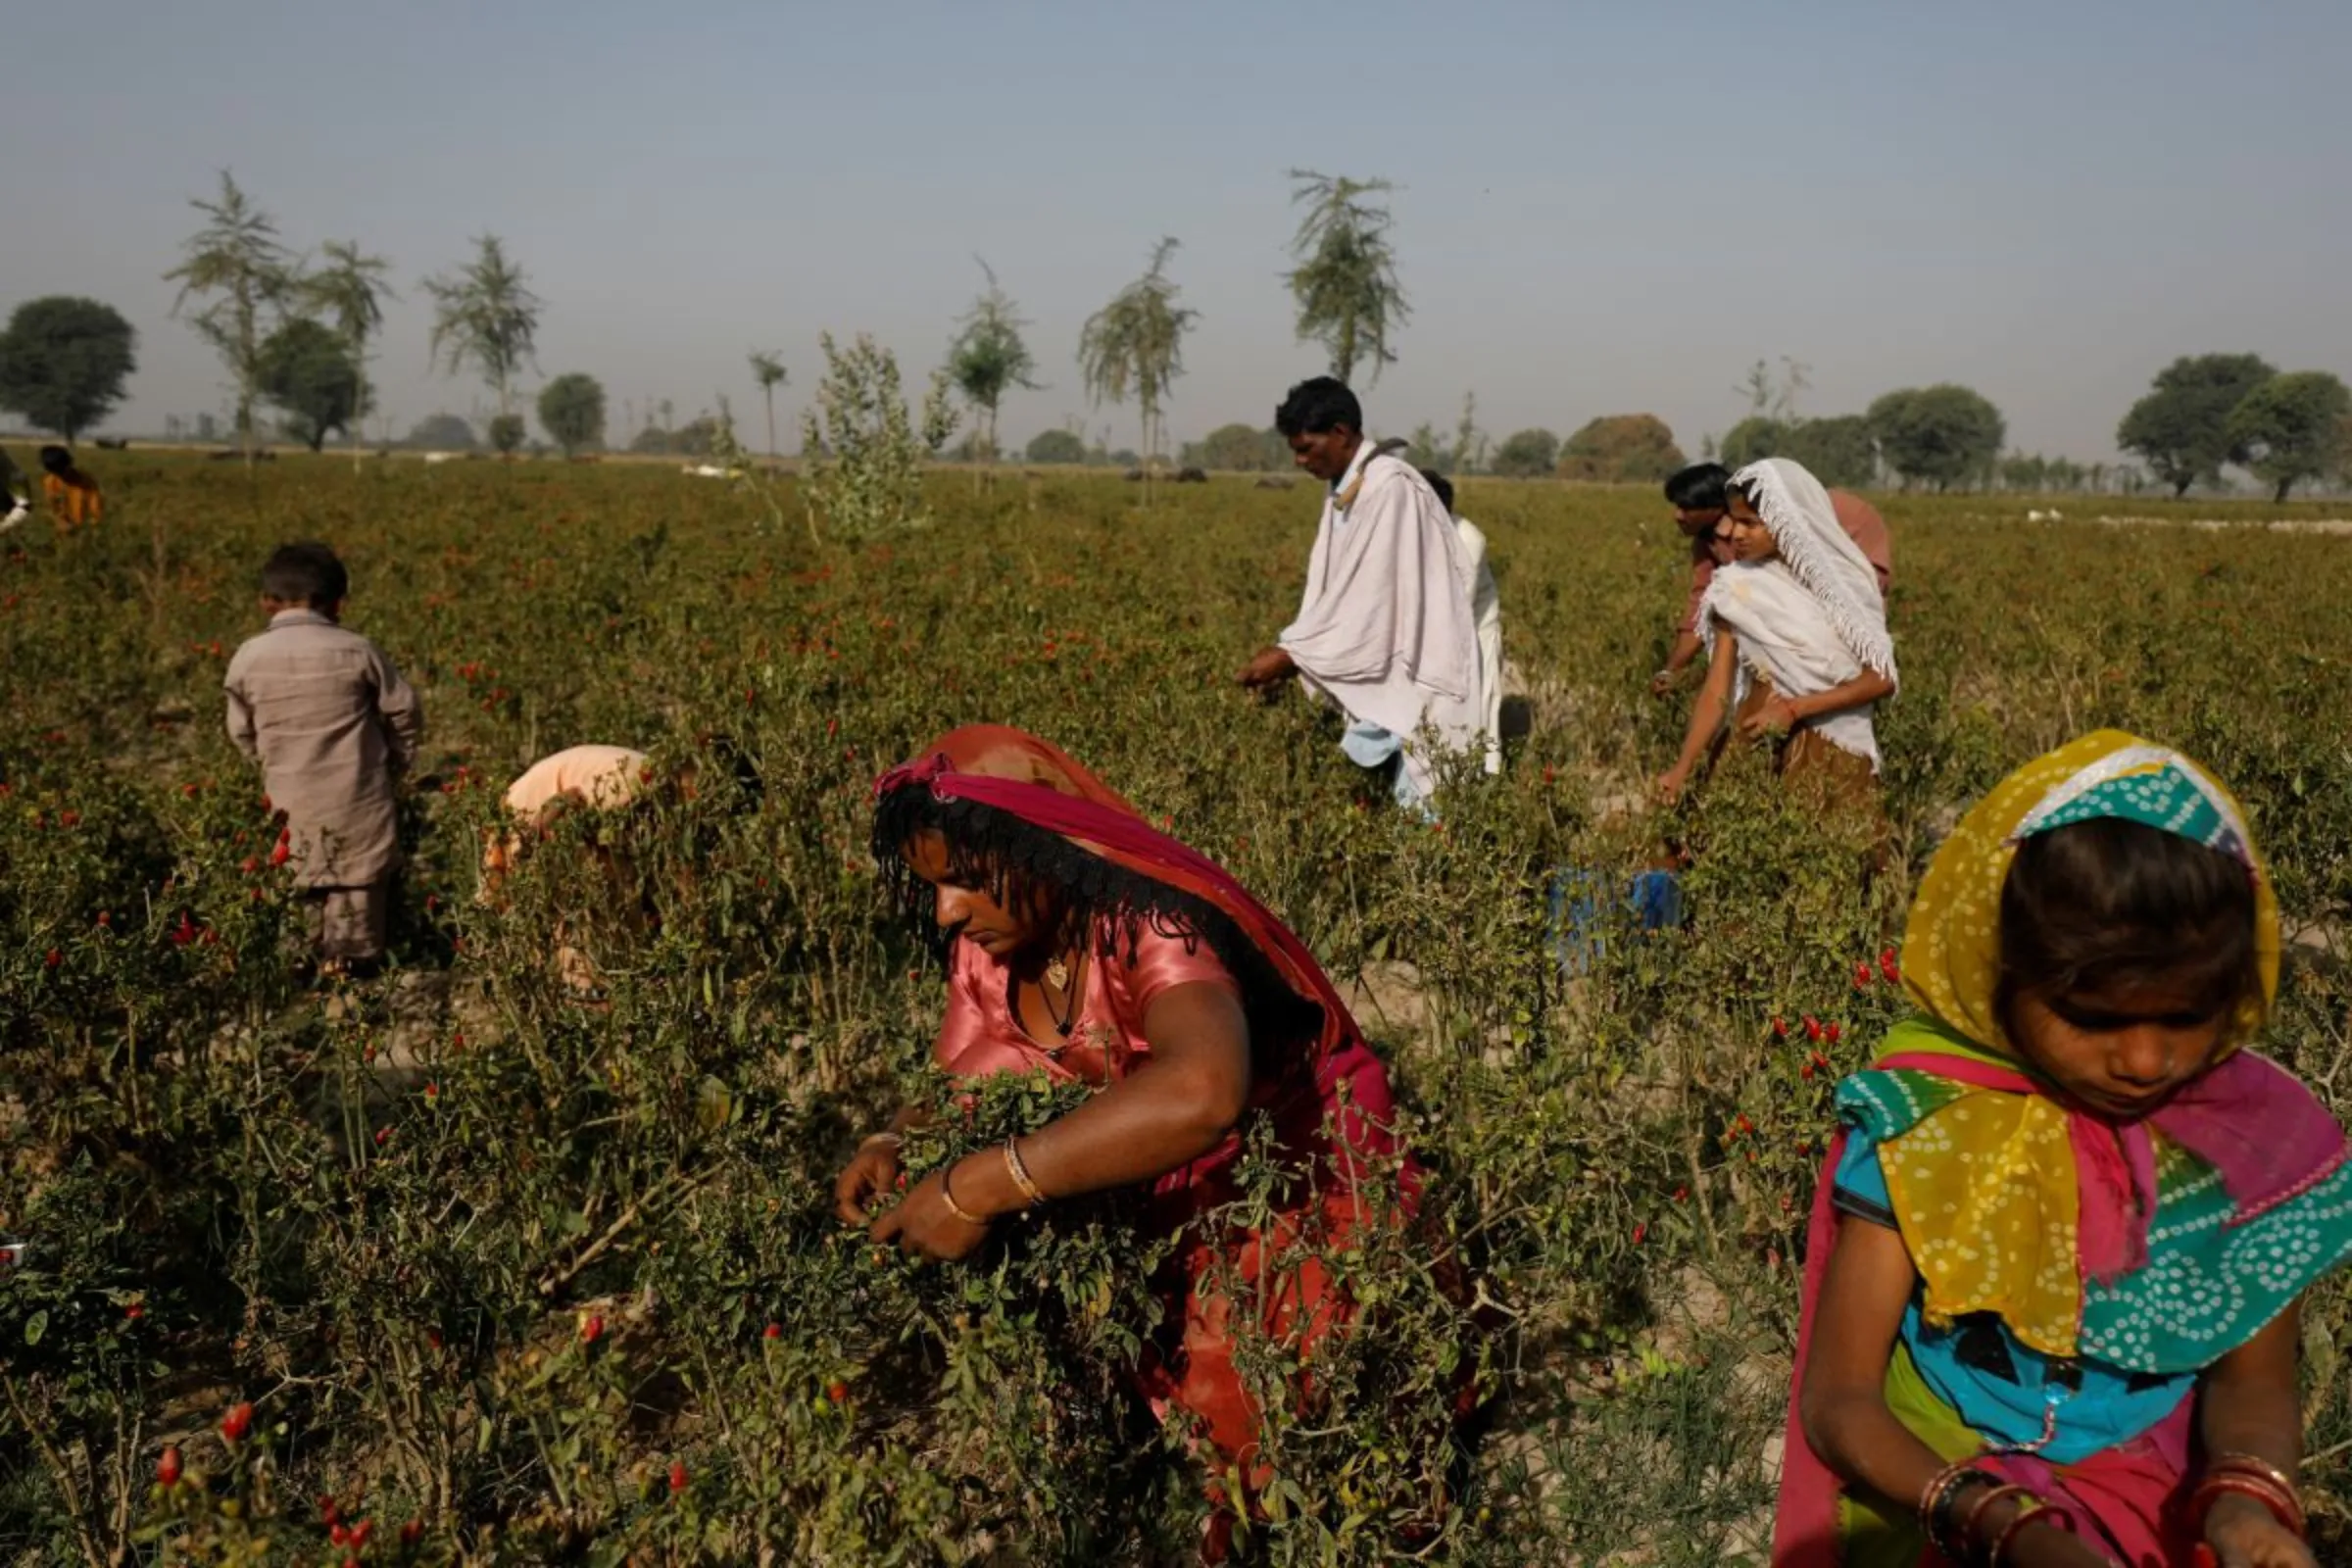 A family harvests red chili peppers in Kunri, Pakistan, February 24, 2022. Devastating floods across Pakistan in August and September after several years of high temperatures, have left chilli farmers struggling in a country heavily dependent on agriculture